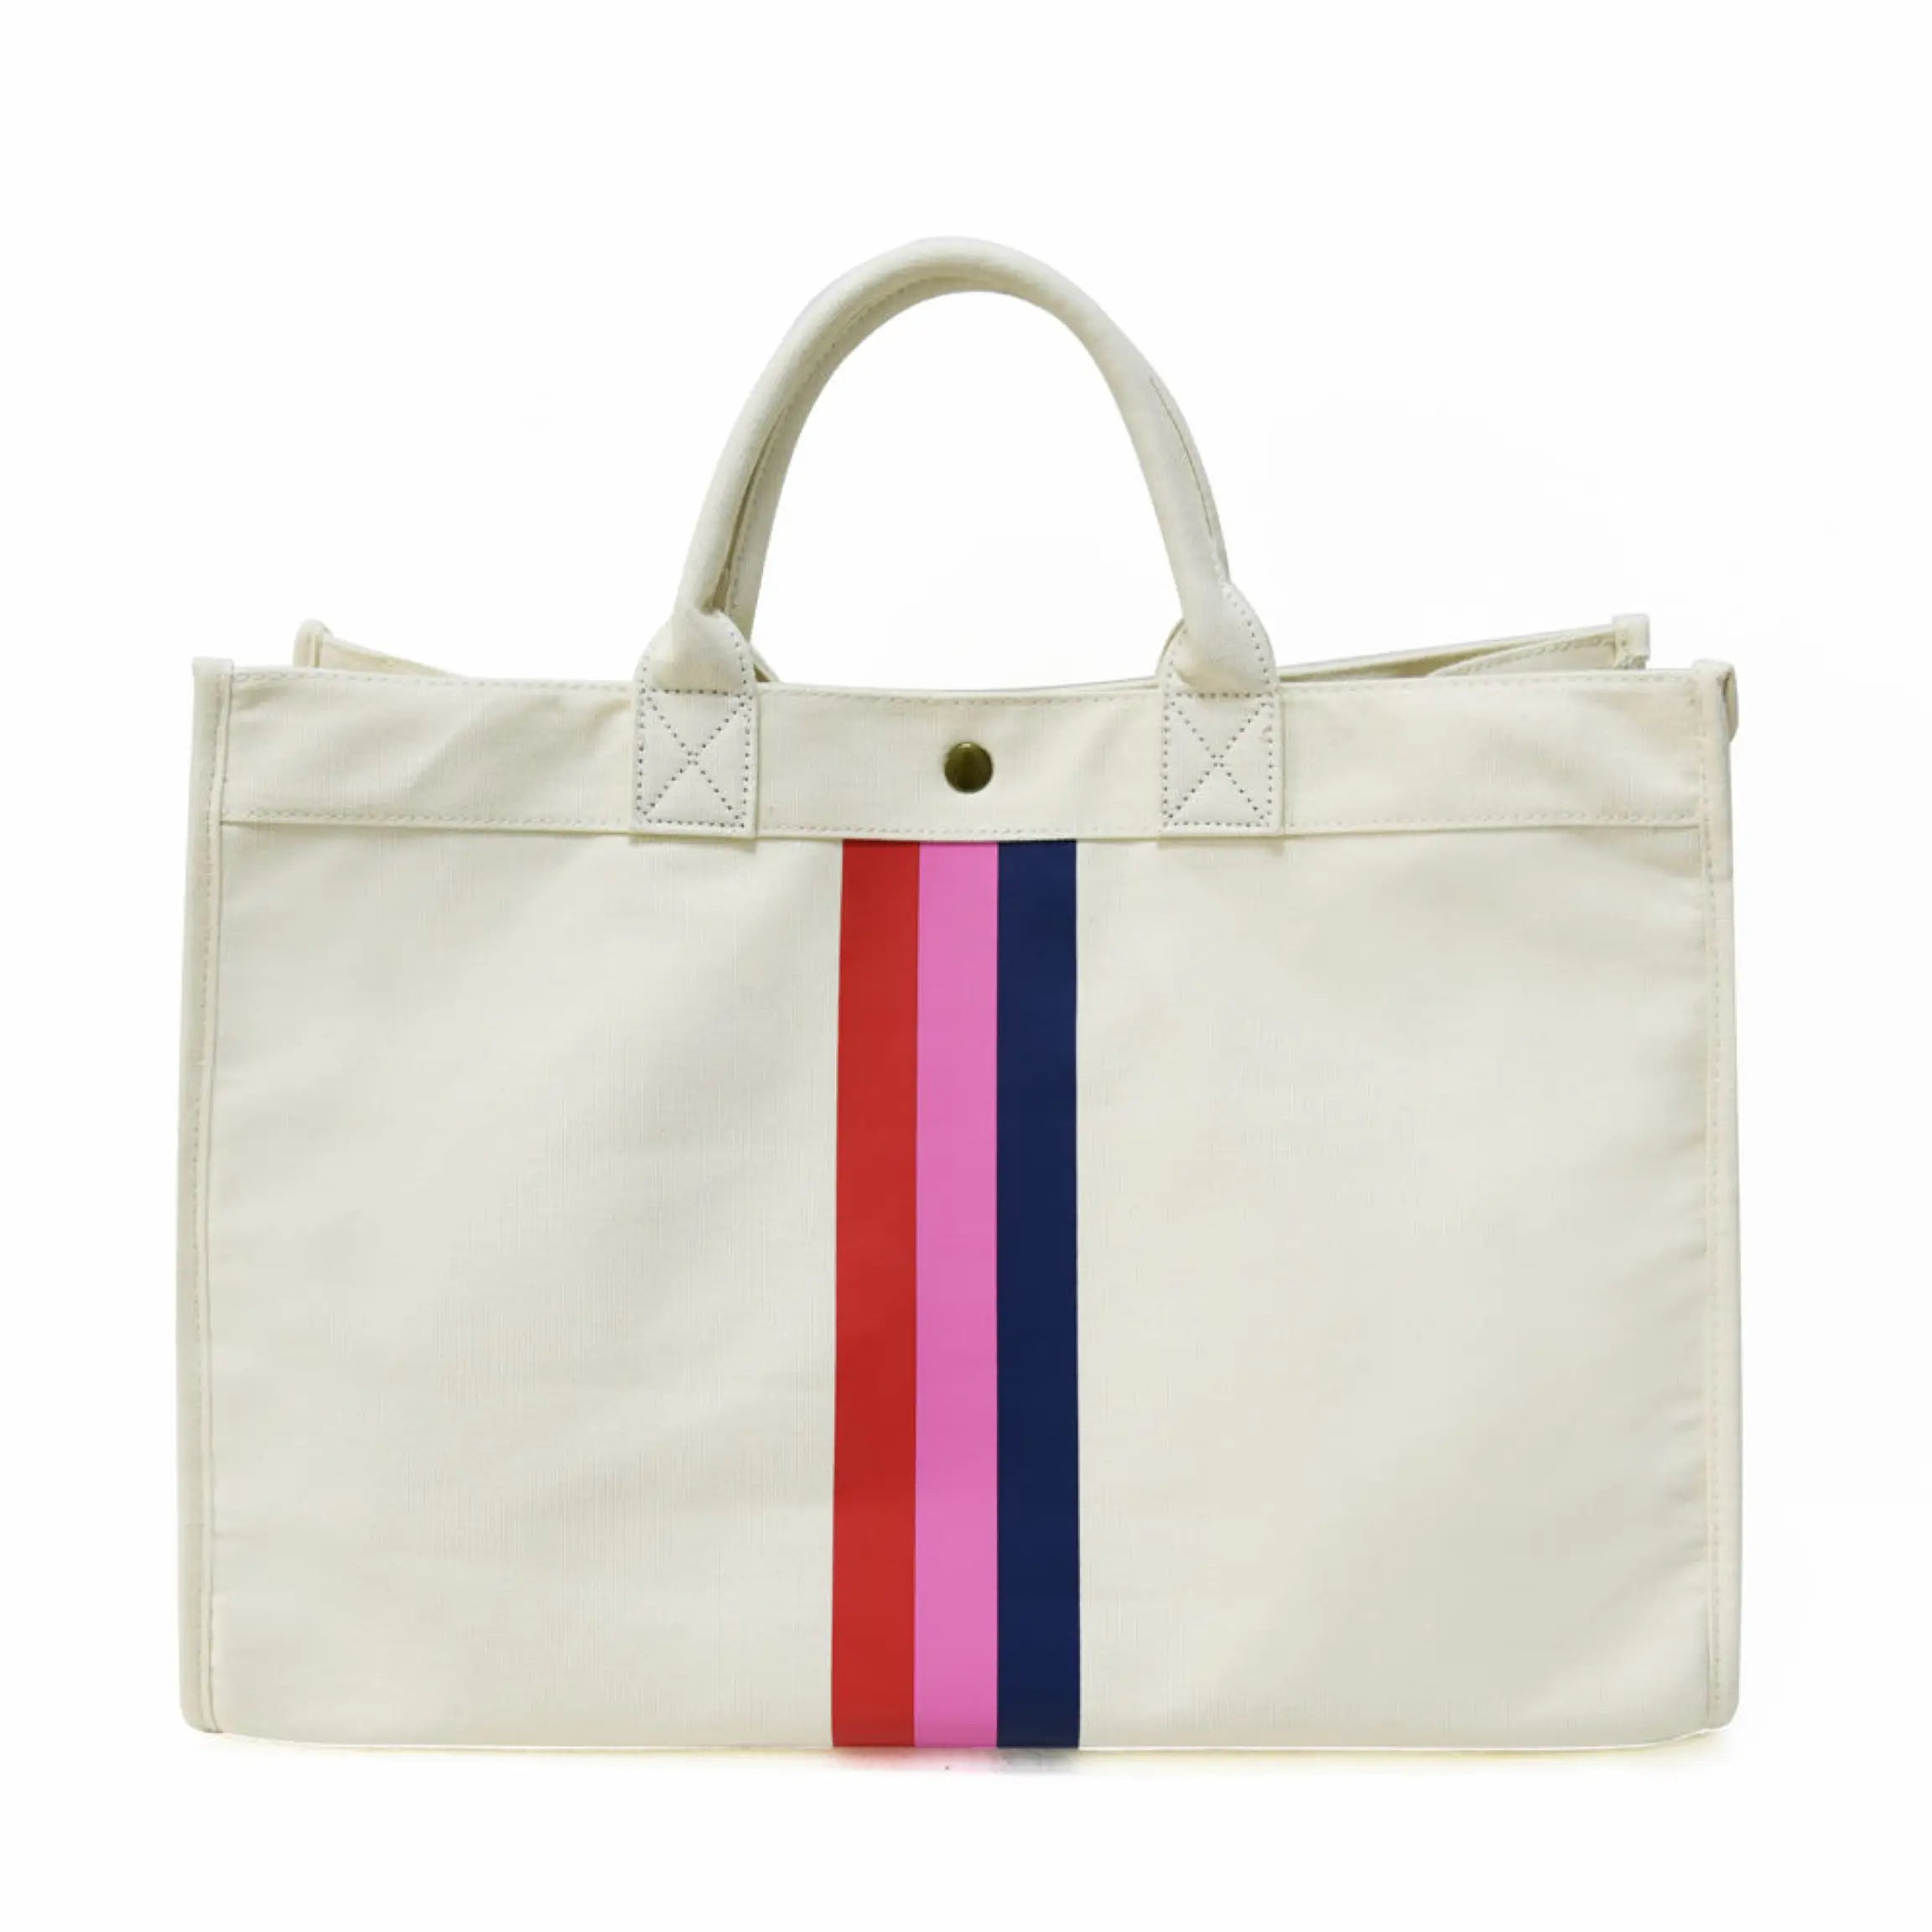 Carmella canvas tote- navy, pink & red stripe